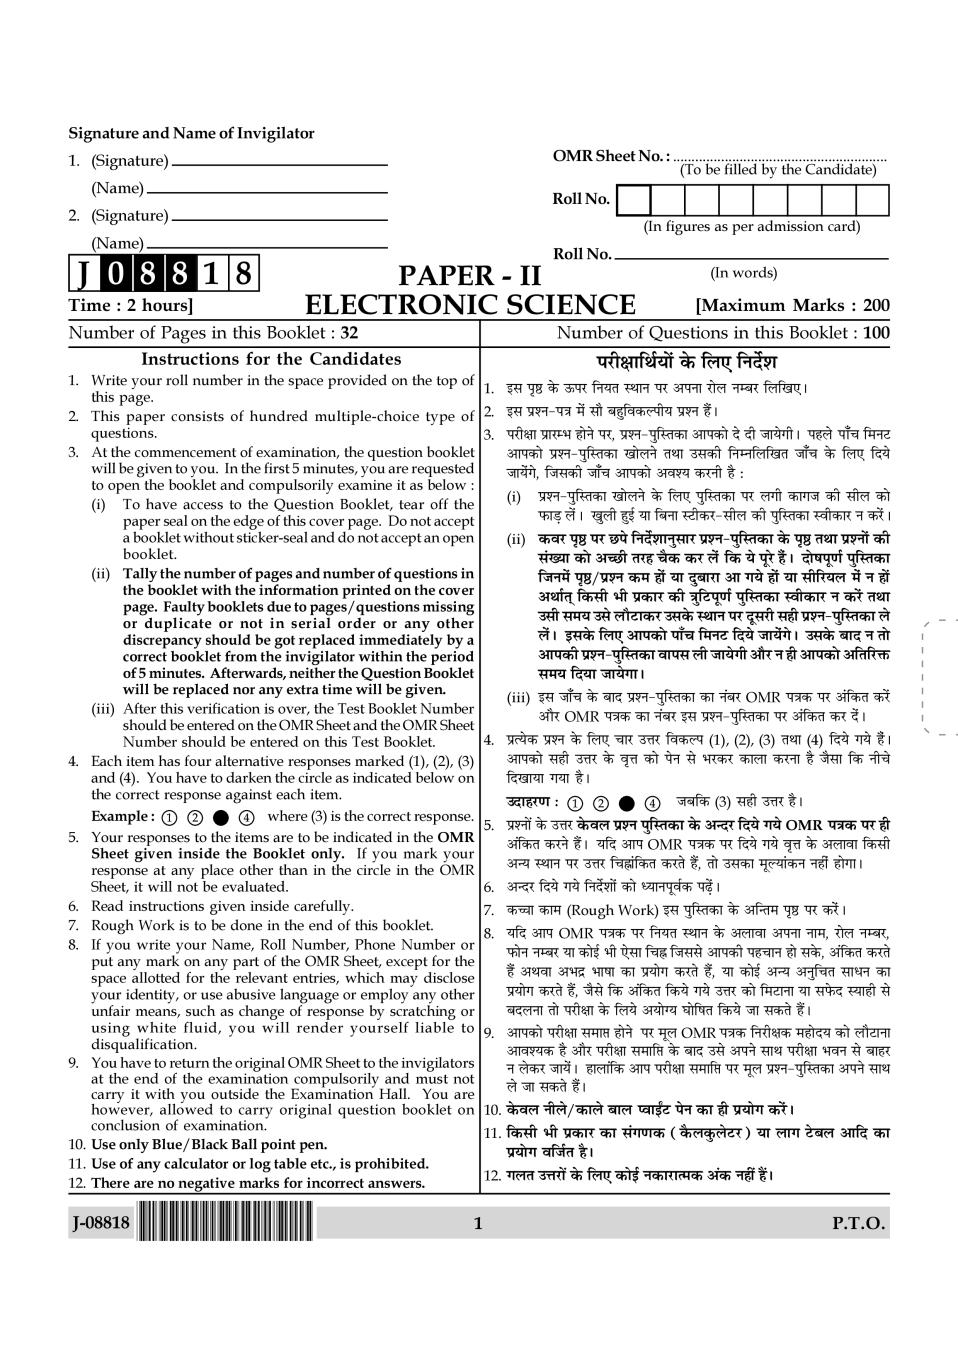 UGC NET Electronic Science Question Paper 2018 - Page 1